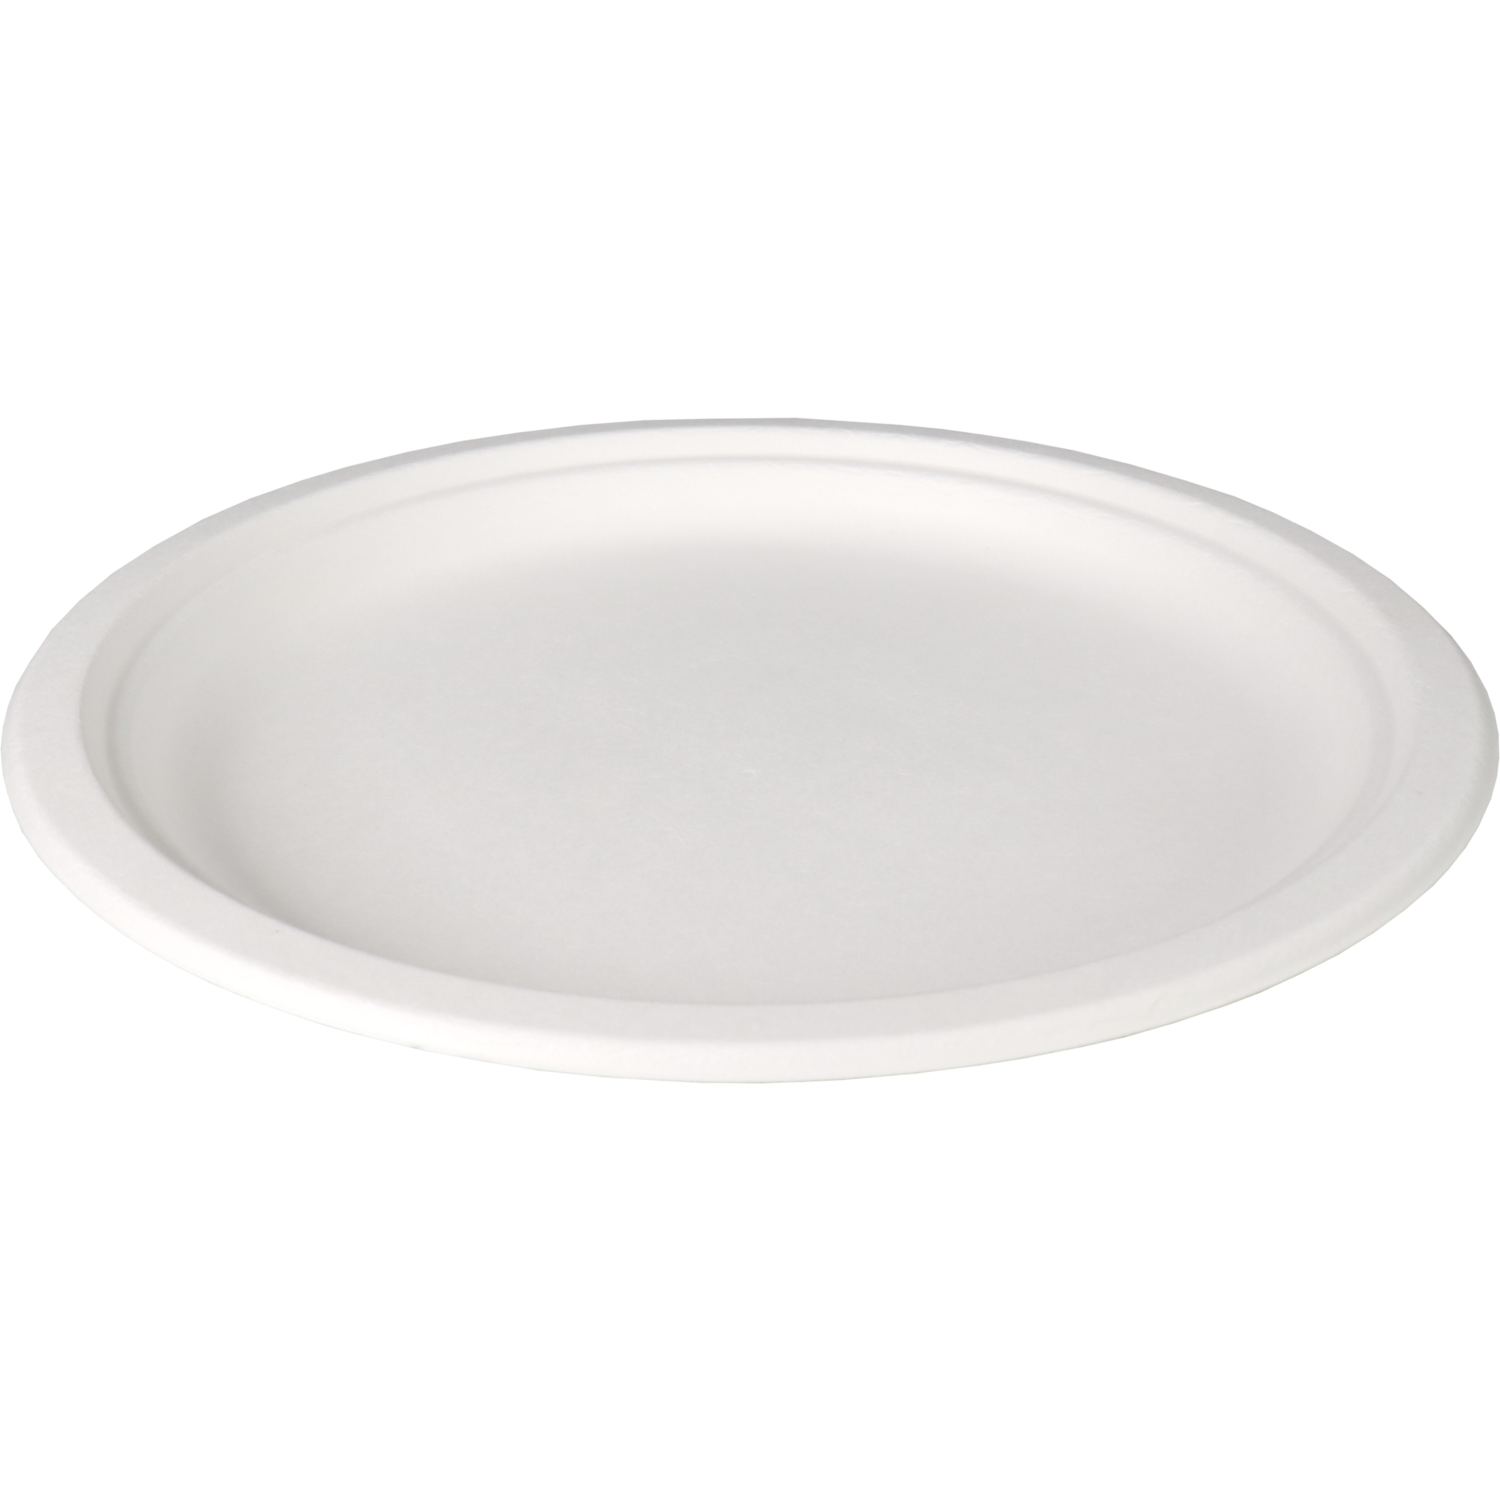 Depa® Plate, round, 1 compartment, bagasse (sugarcane pulp), Ø23cm, white 1